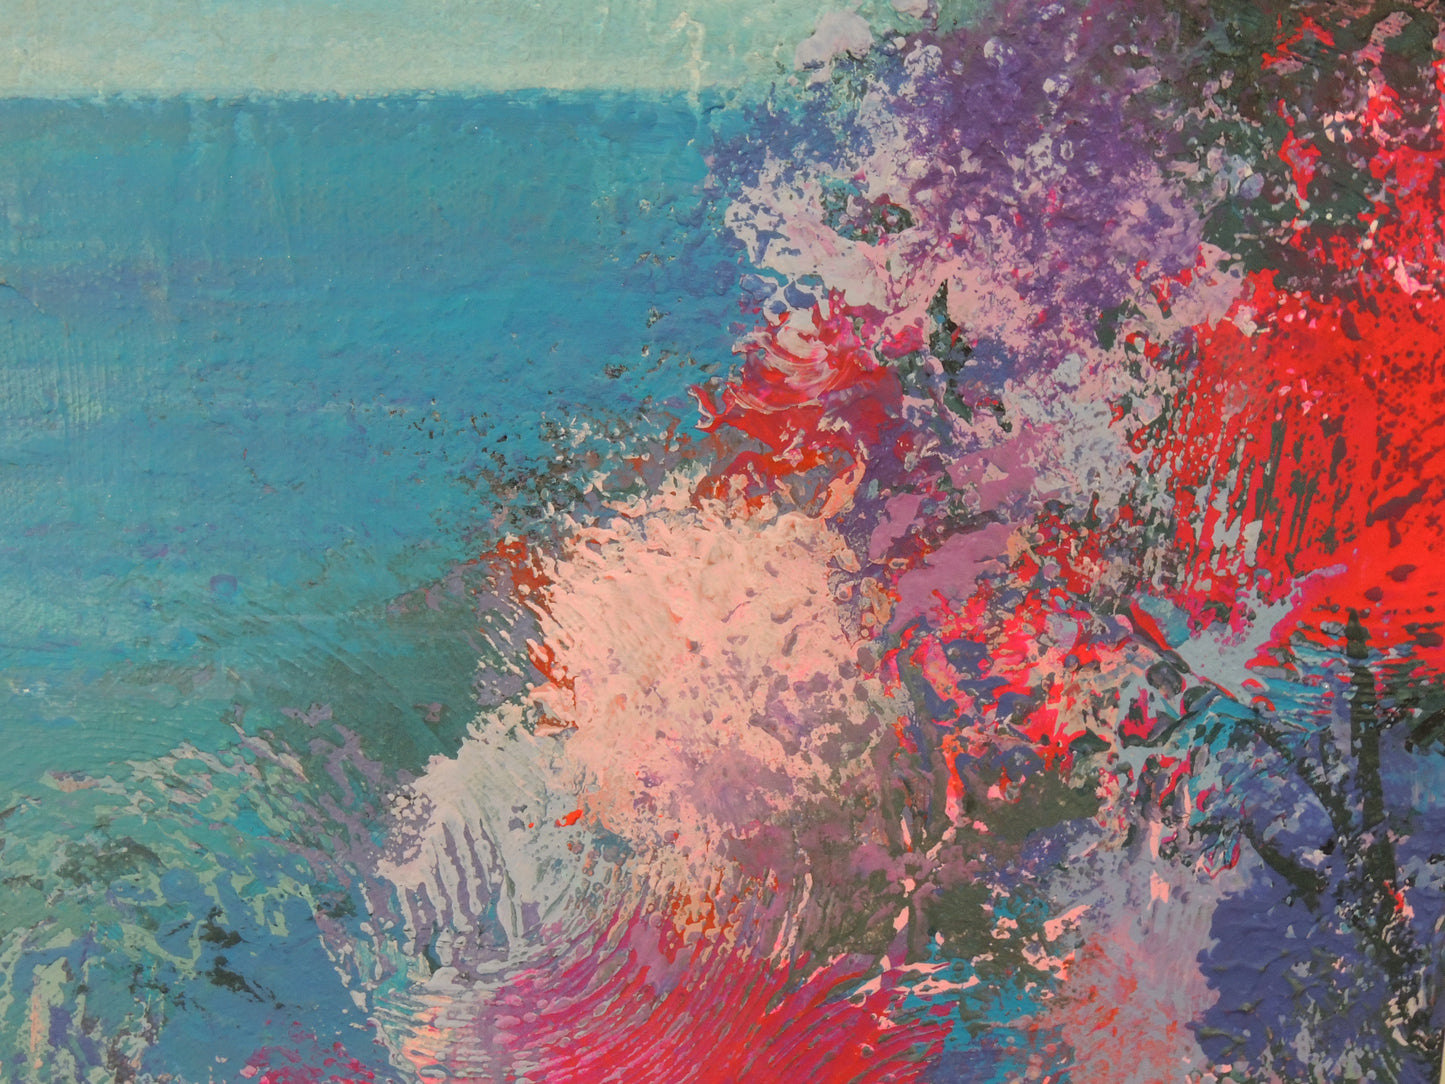 Detail 2 of flowers with sky and ocean in distance.